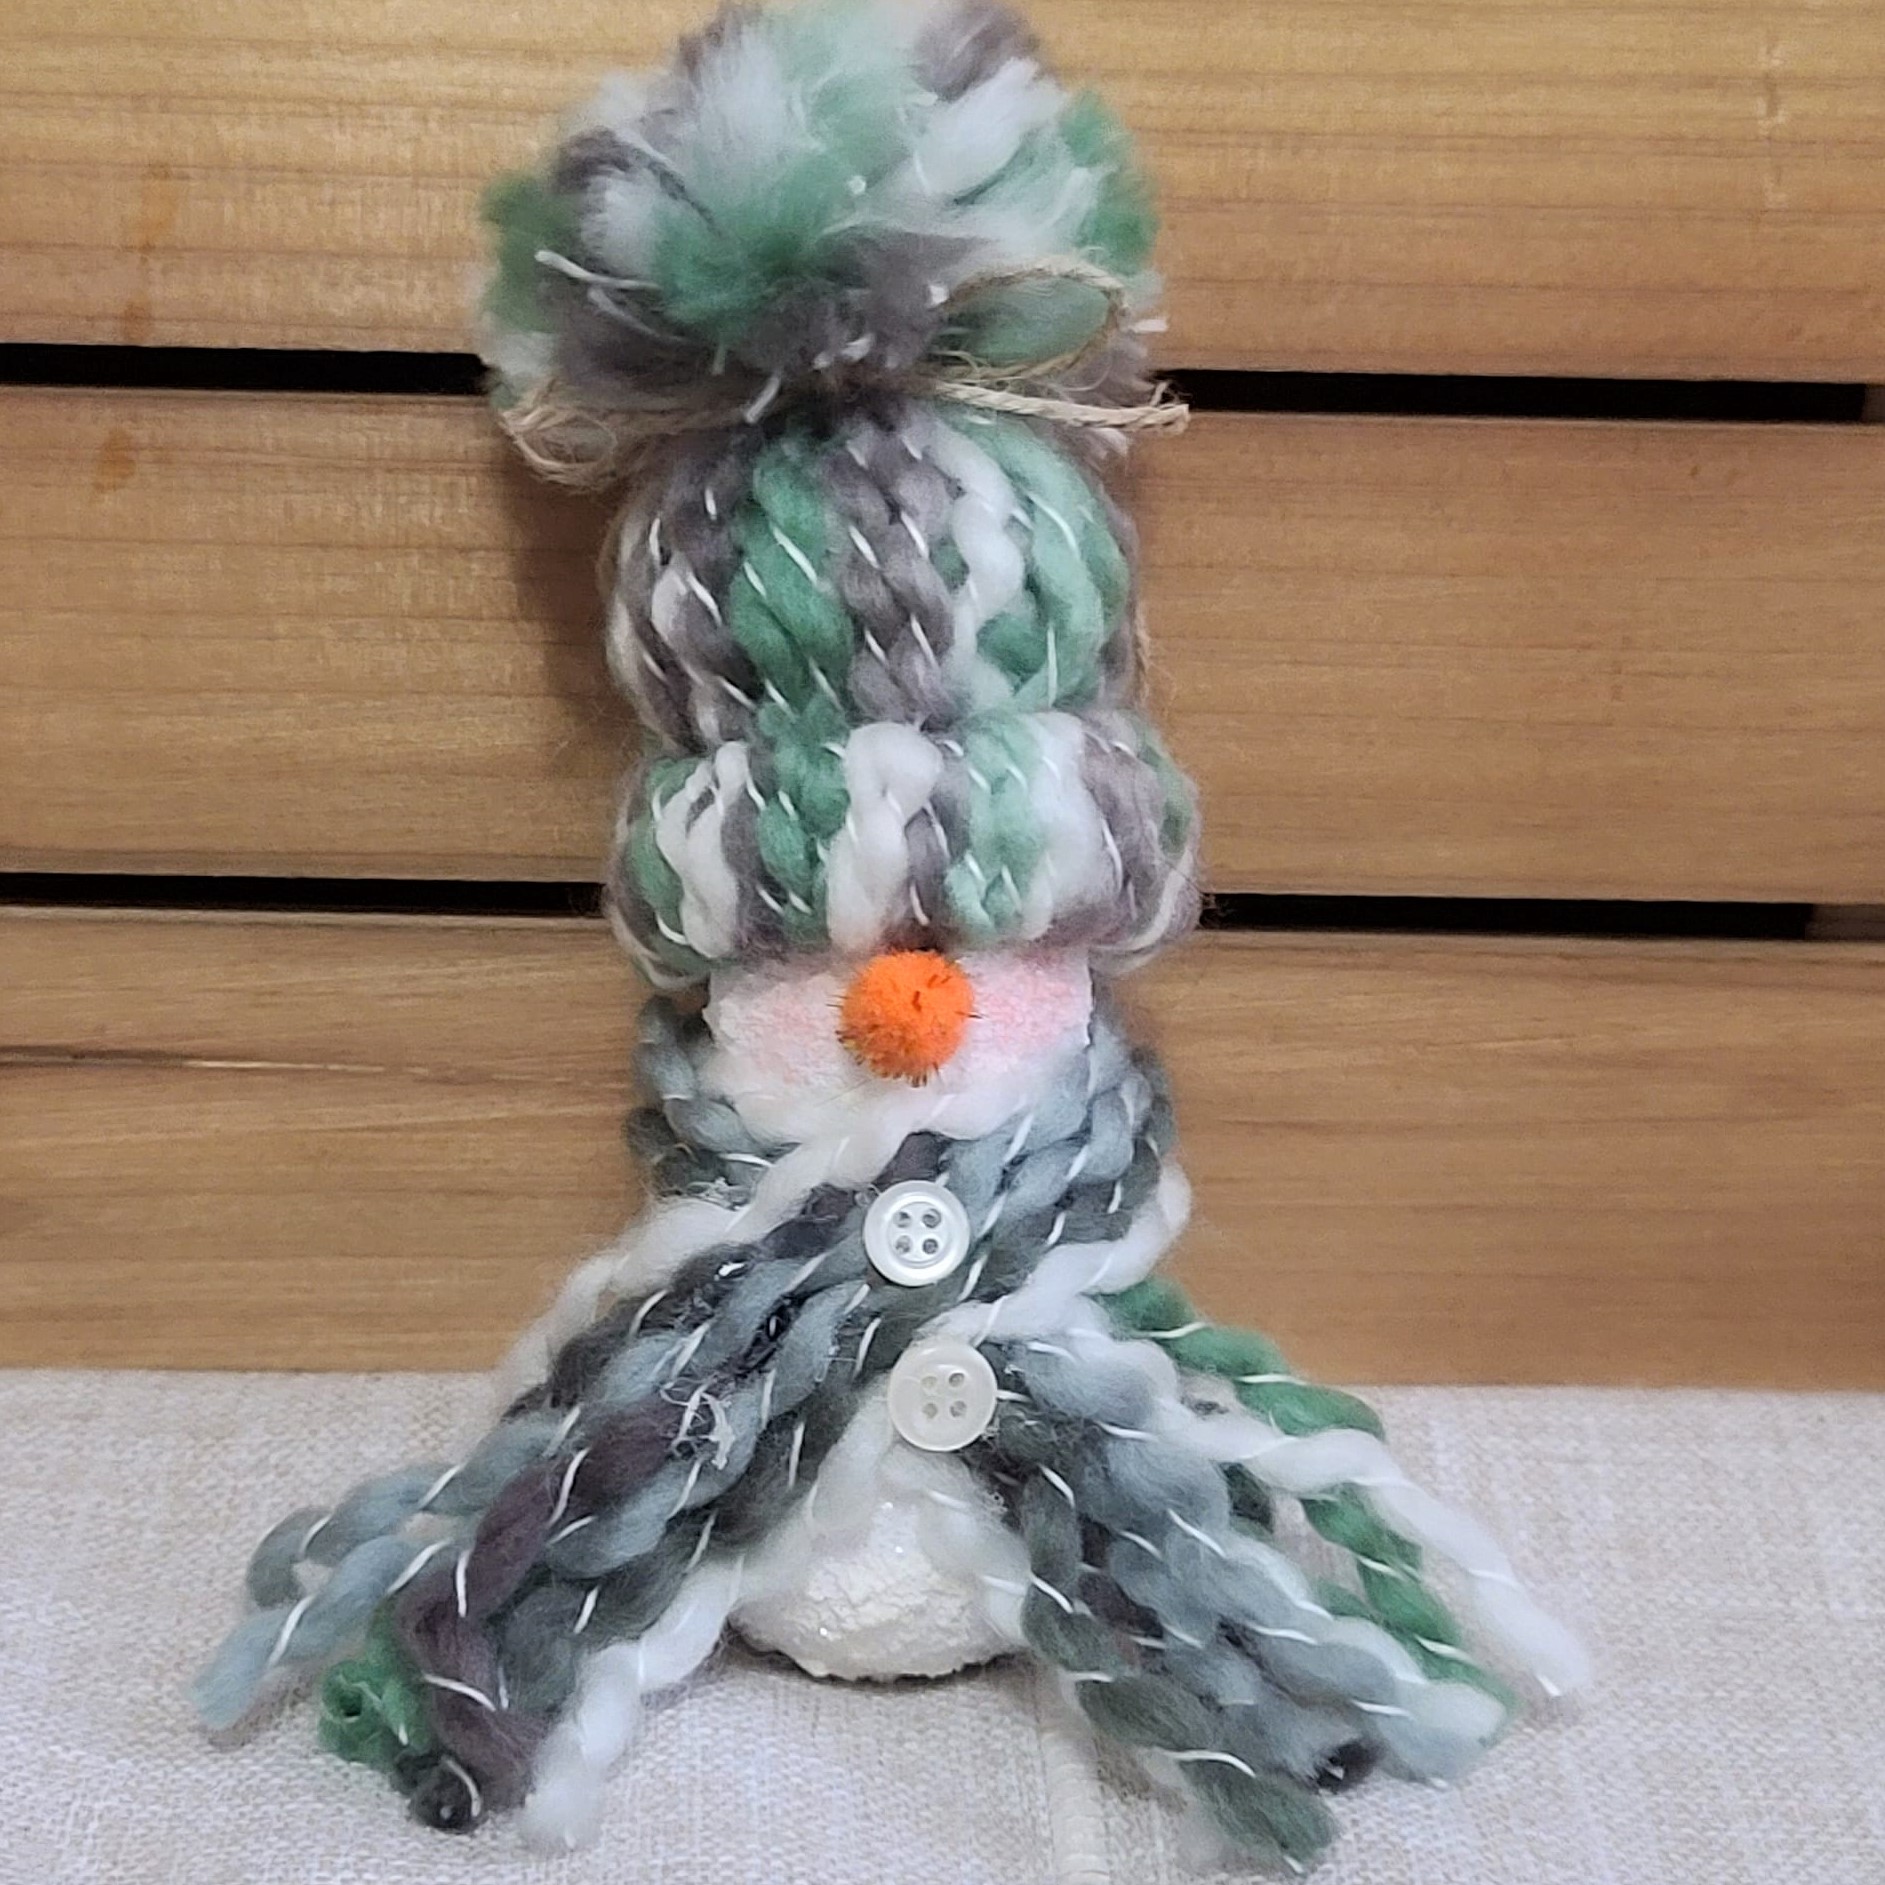 Handpainted gourd snowman ornament with knit hat - green multi